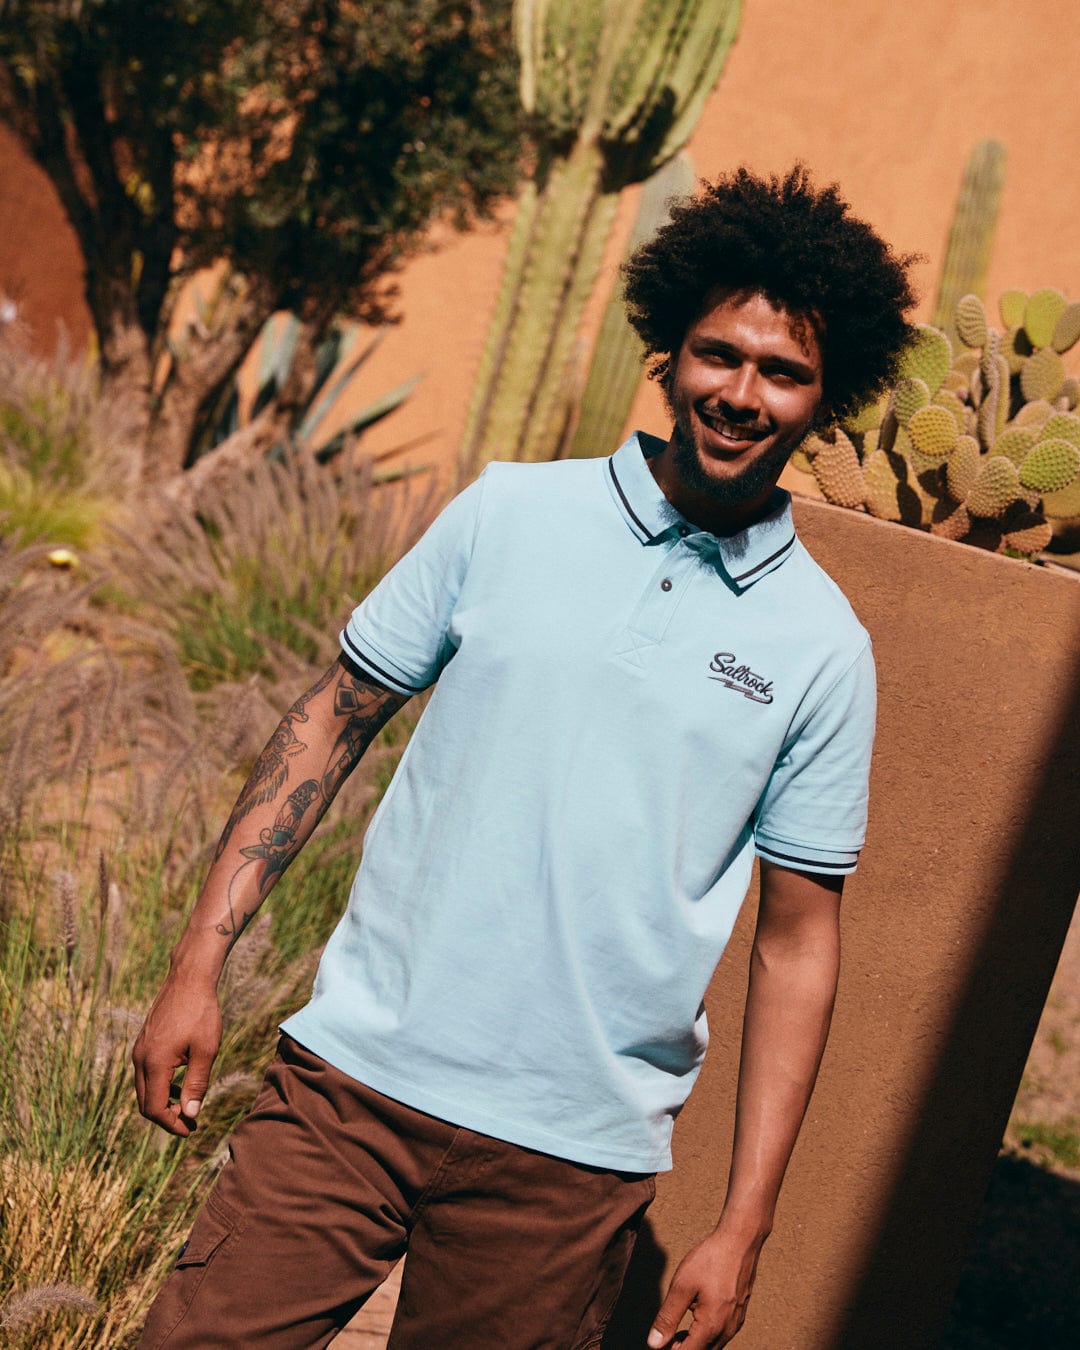 A man with curly hair and tattoos on his right arm wears a Saltrock Strike Logo - Mens Short Sleeve Polo Shirt - Light Blue and brown pants, standing outdoors near cacti and plants.